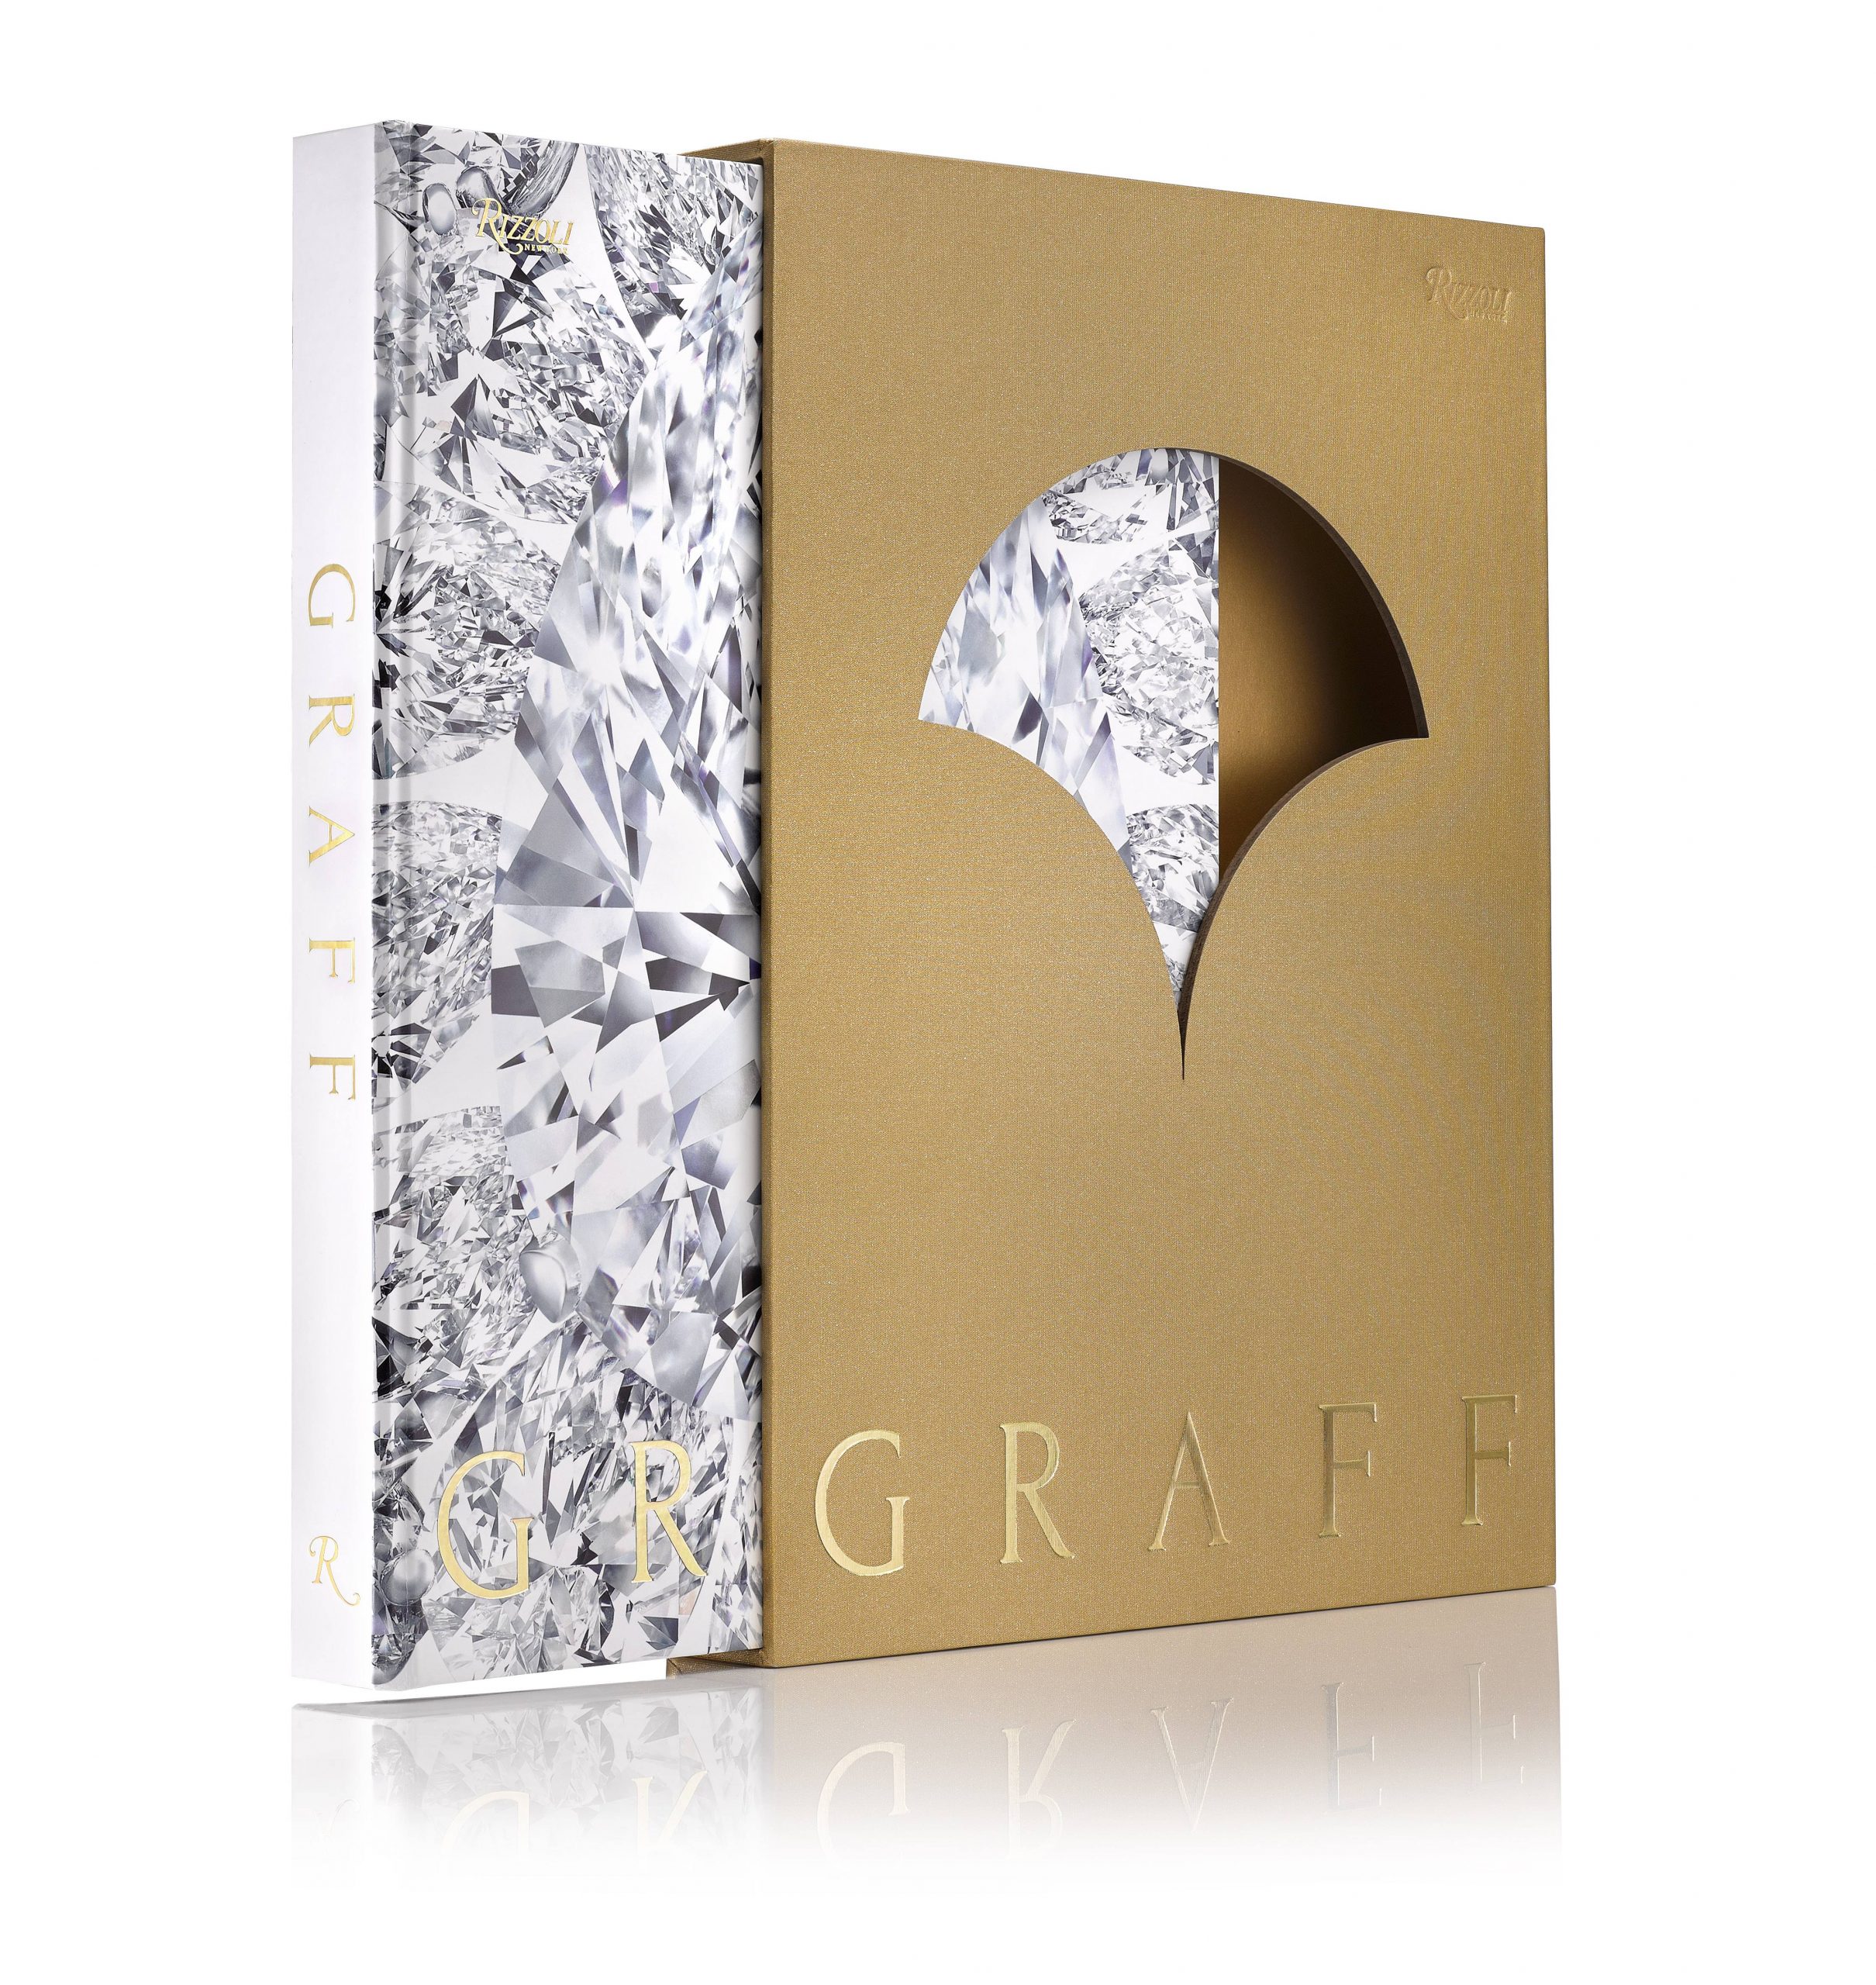 Graff Coffee Table Book with Slipcase